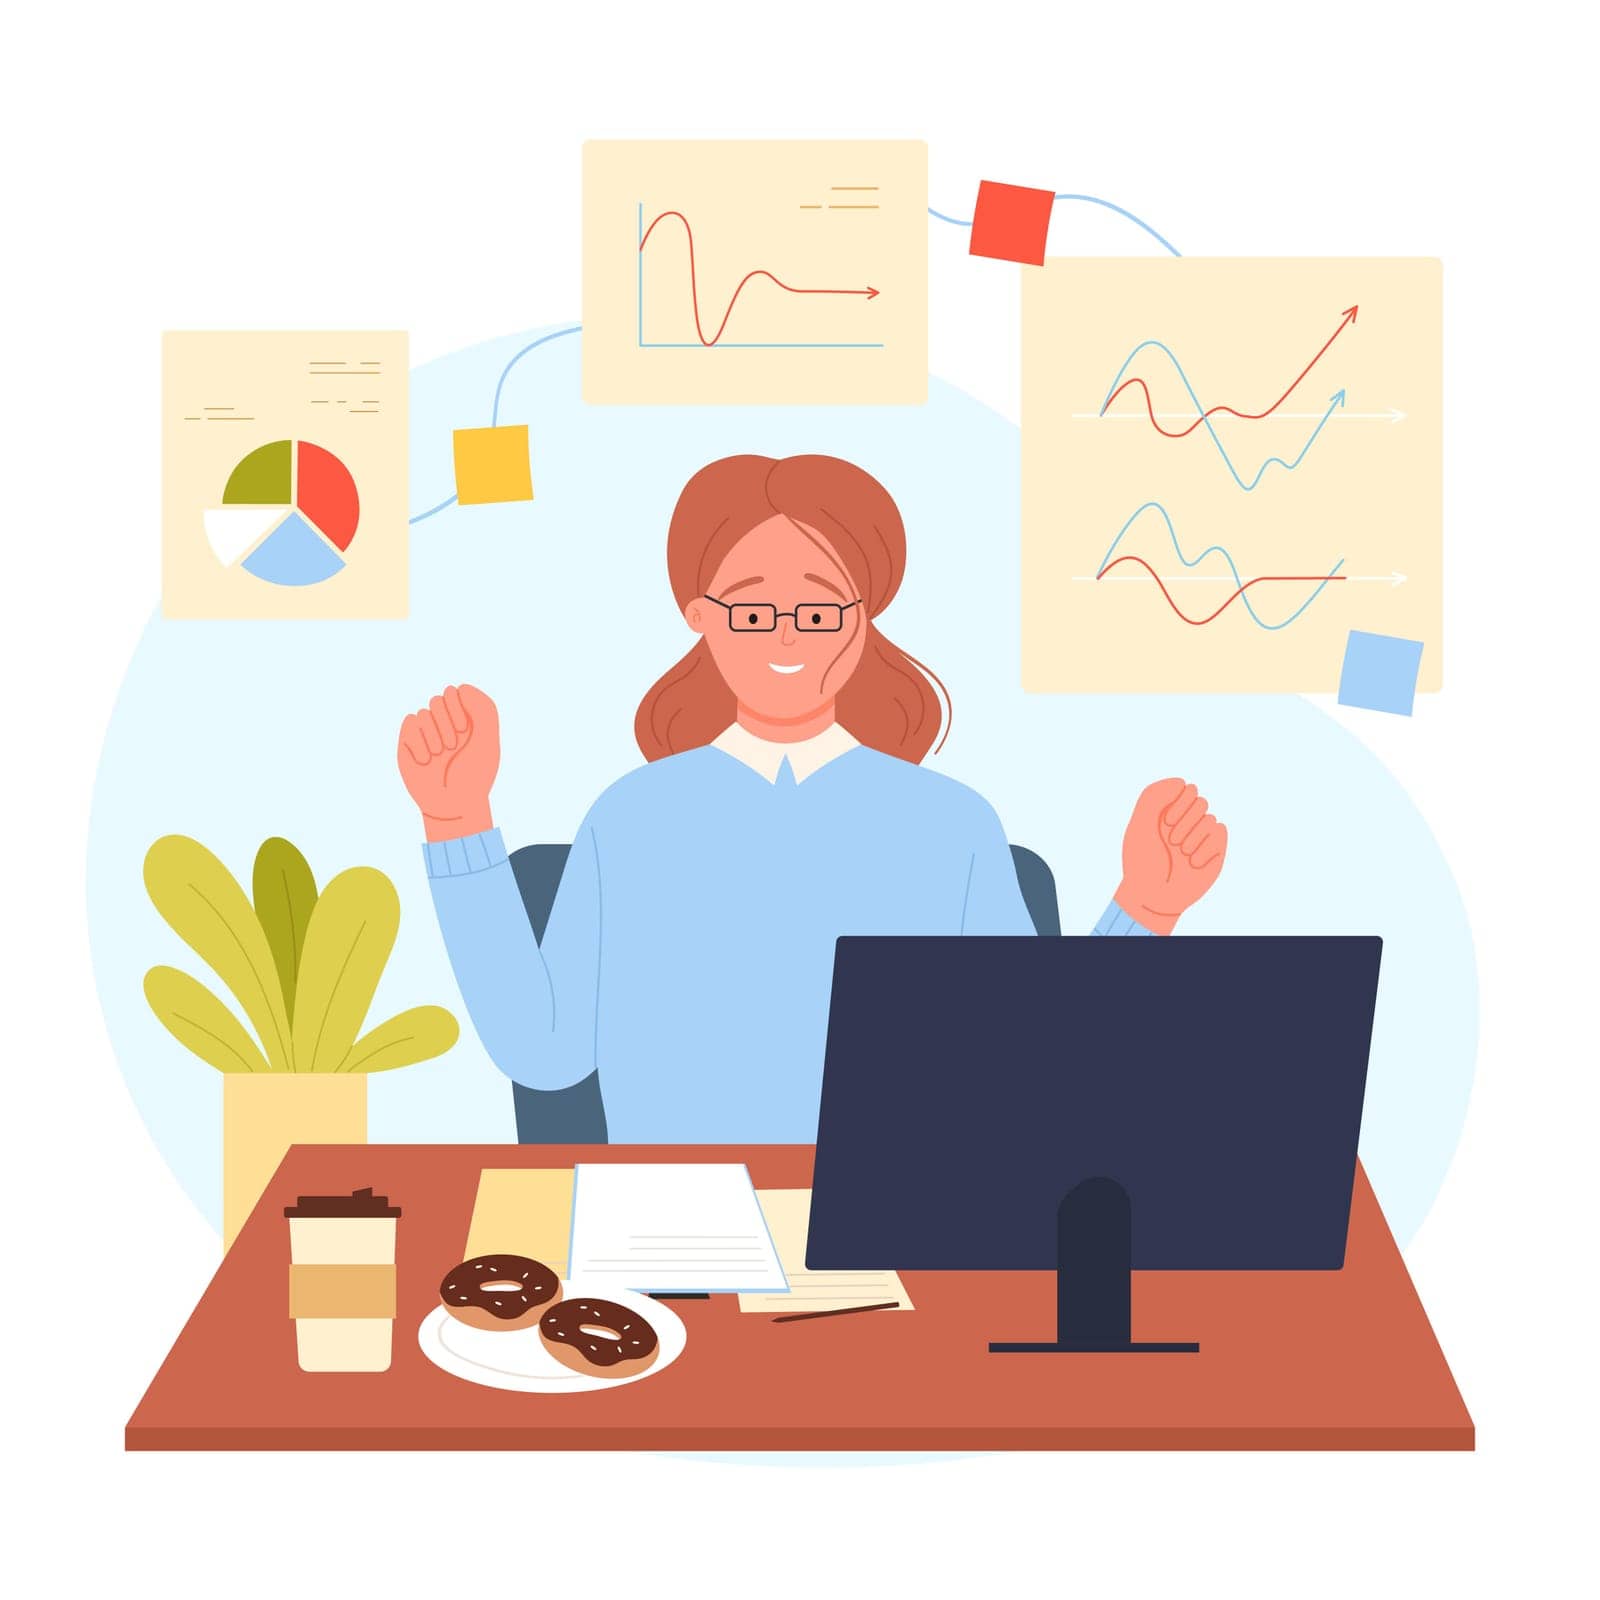 Success achievement of happy female employee vector illustration. Cartoon young woman working at office table with computer, financial chart presentation and statistics graph with growing arrows